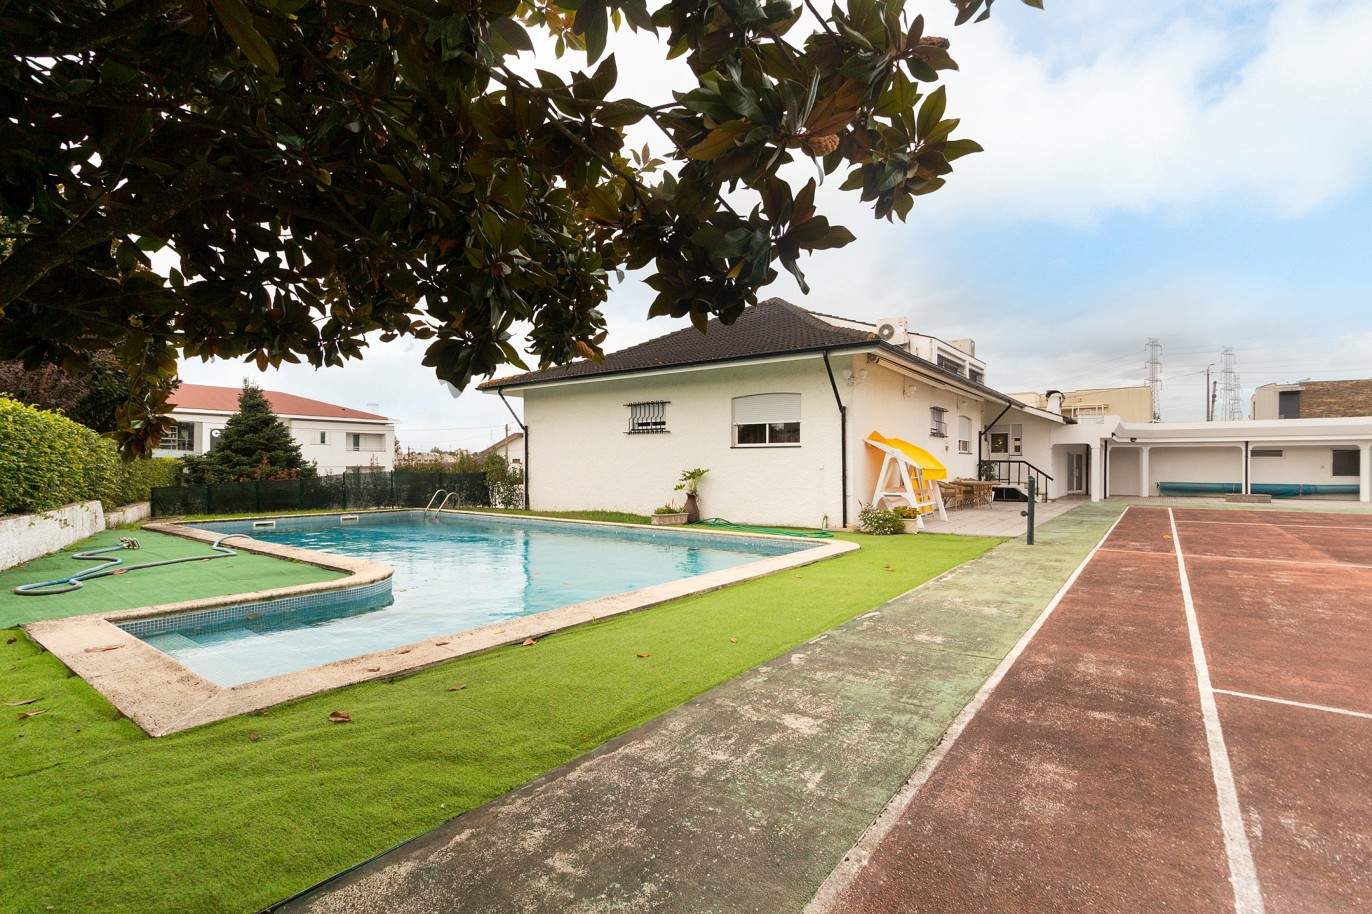 4 bedroom villa with pool, tennis court and garden, for sale, in Maia, Porto, Portugal_210608